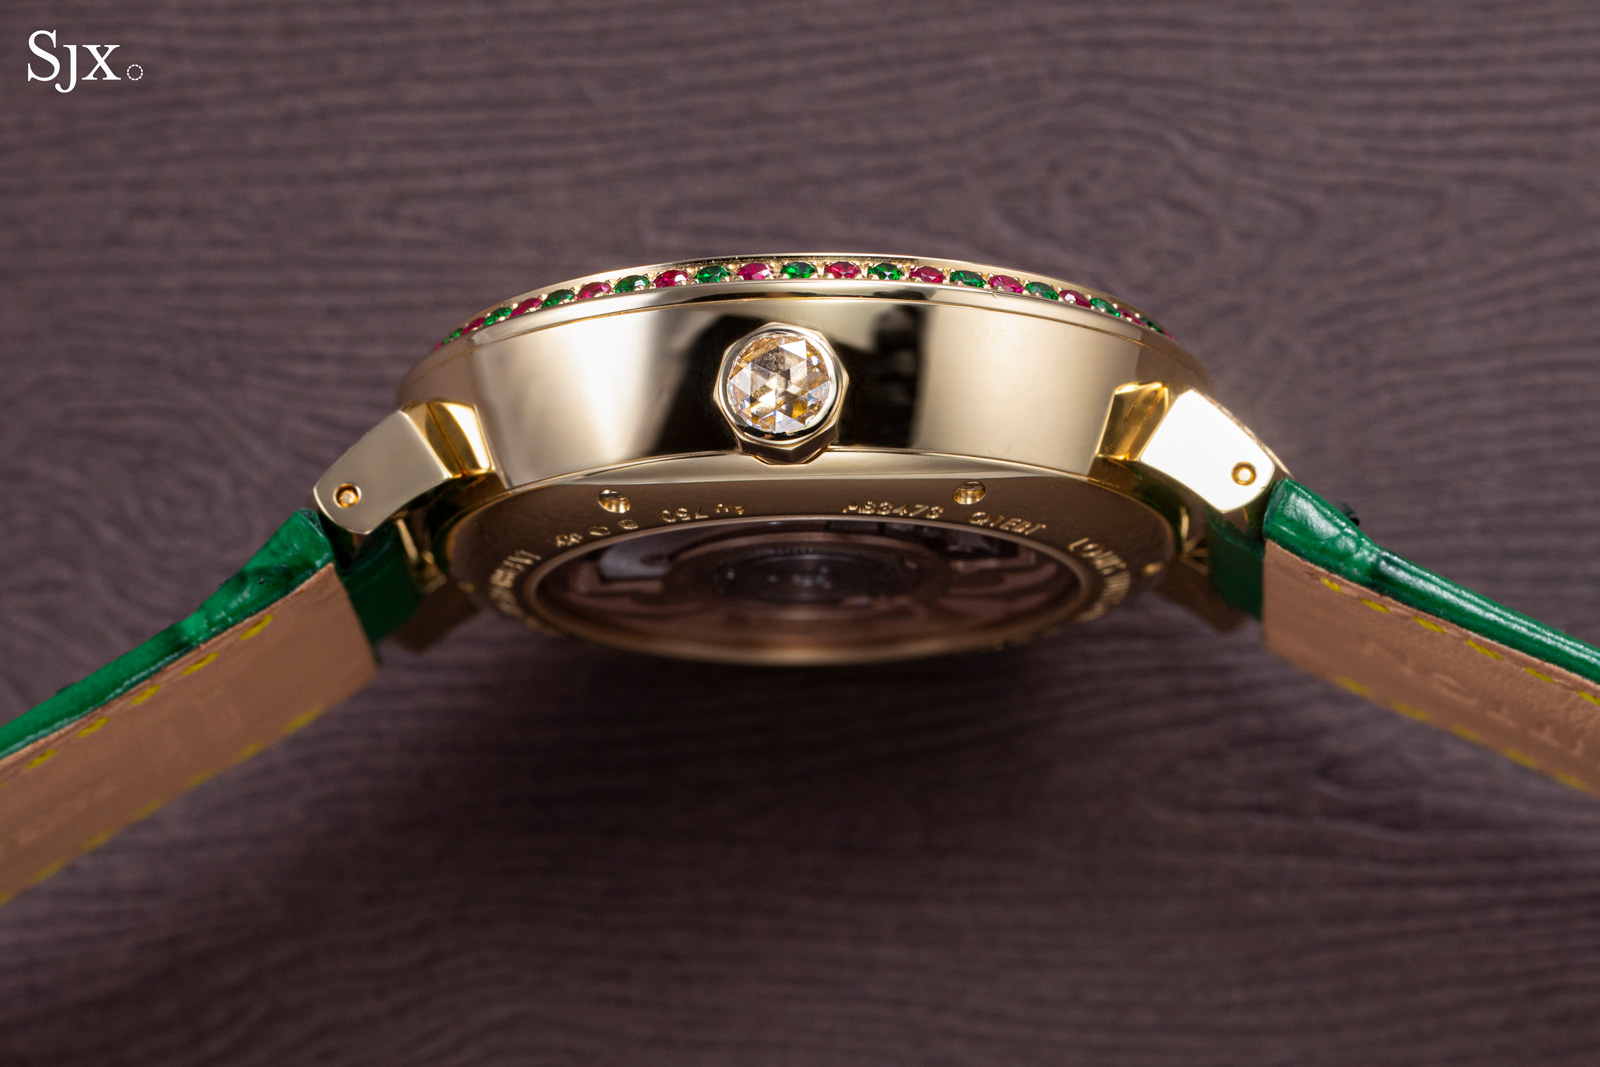 INTRODUCING: The Louis Vuitton Tambour Slim Vivienne Jumping Hours